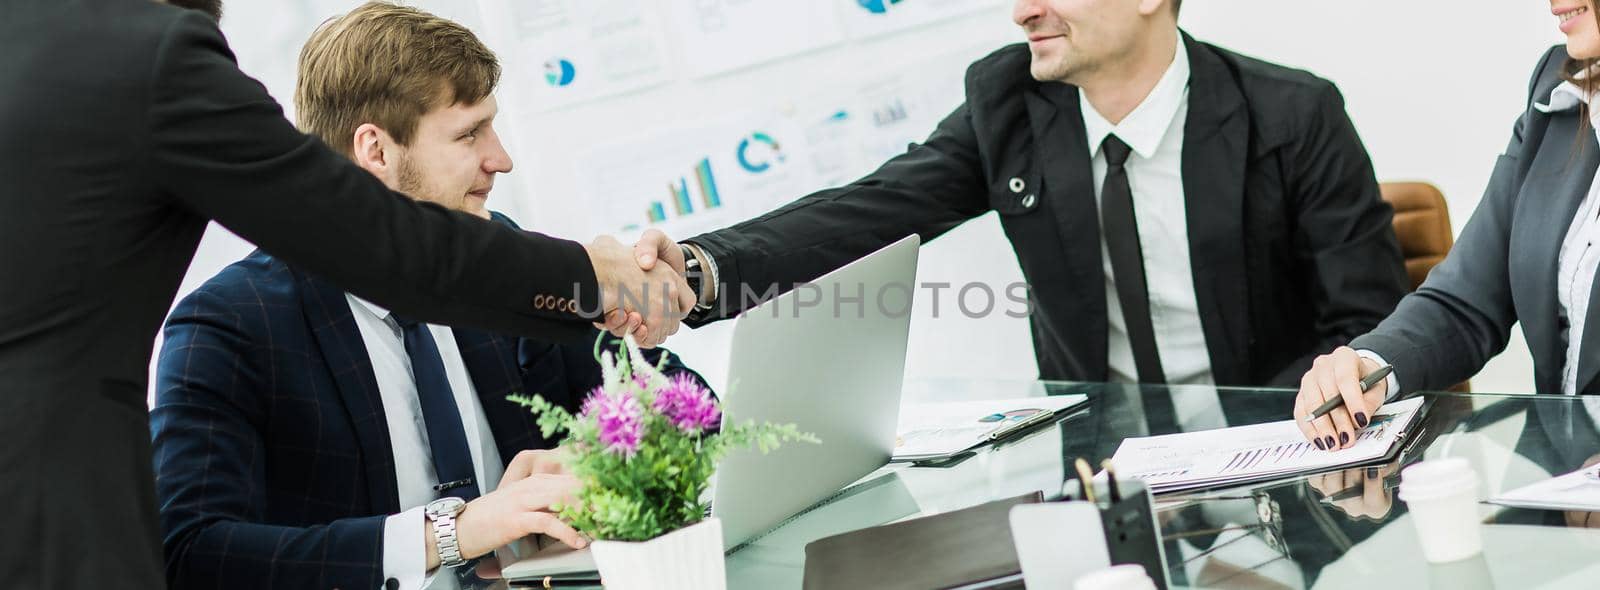 handshake of business partners after signing the contract in the workplace in a modern office by SmartPhotoLab